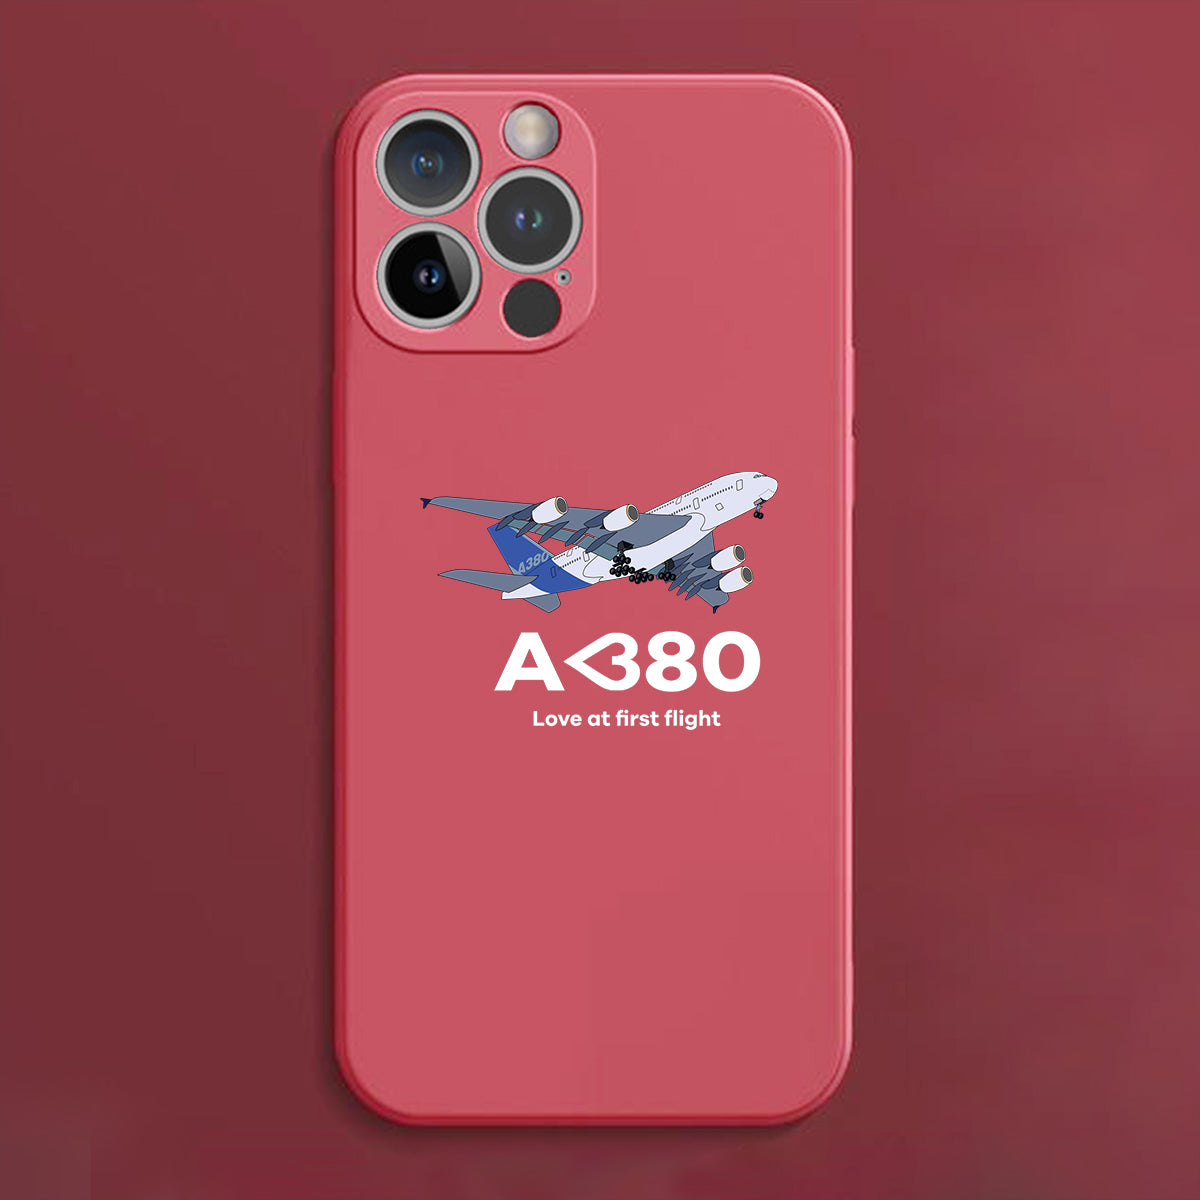 Airbus A380 Love at first flight Designed Soft Silicone iPhone Cases